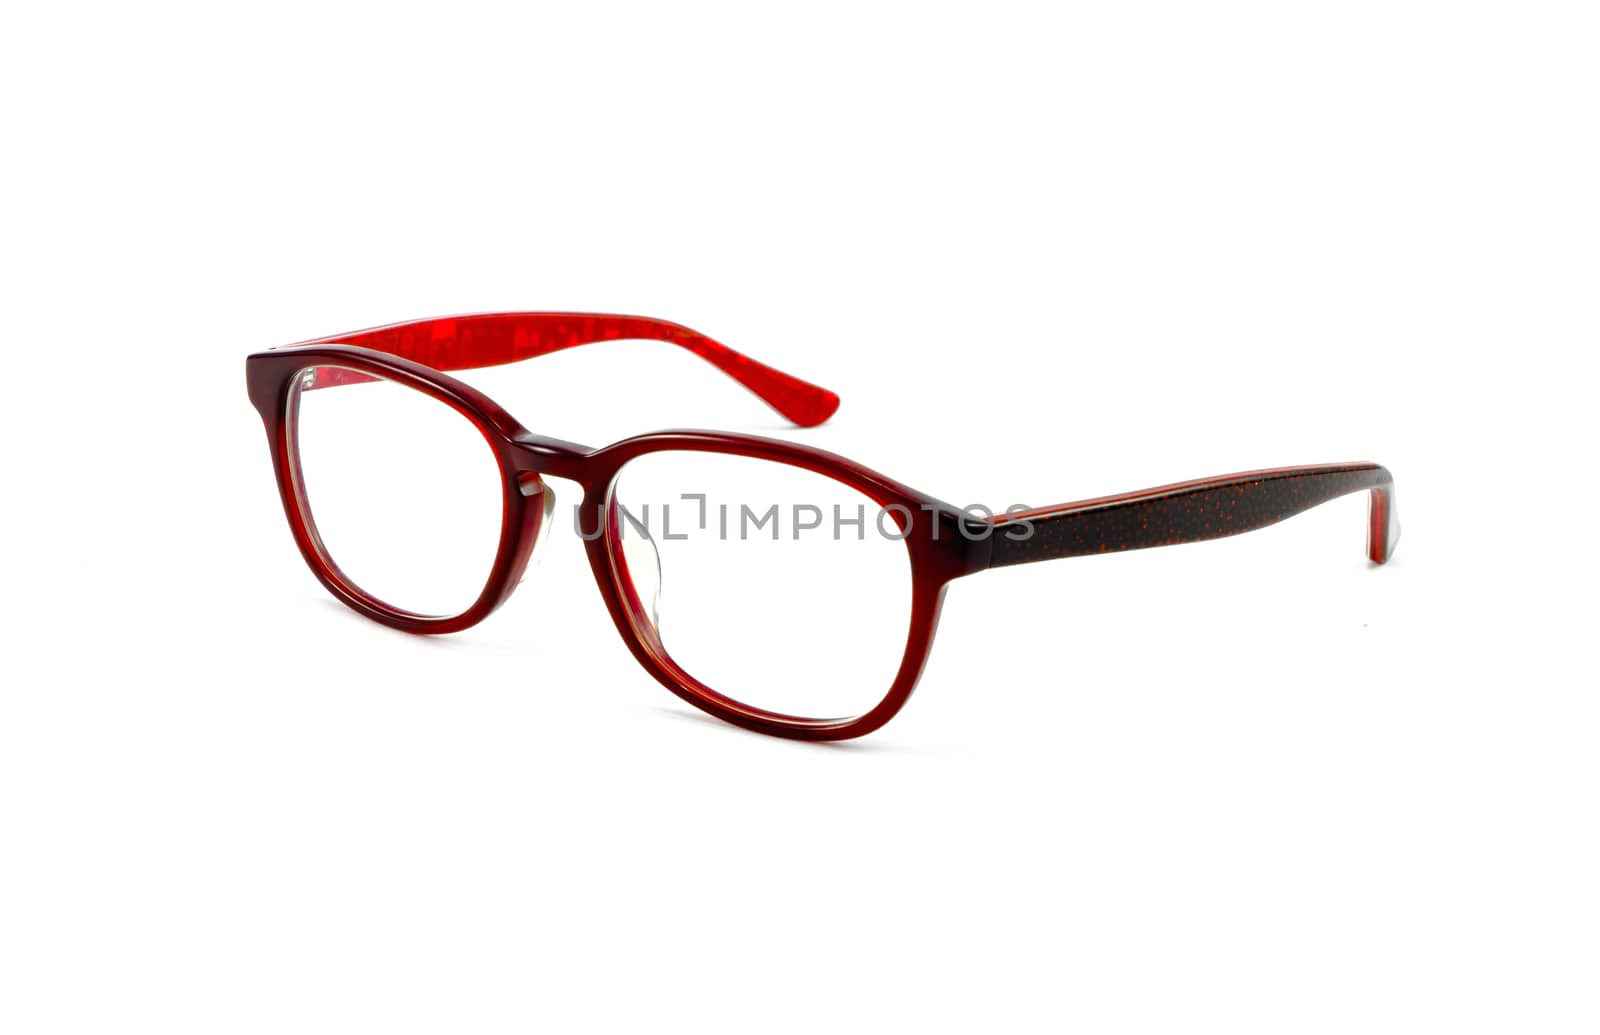 Red eye glasses Isolated on white background.